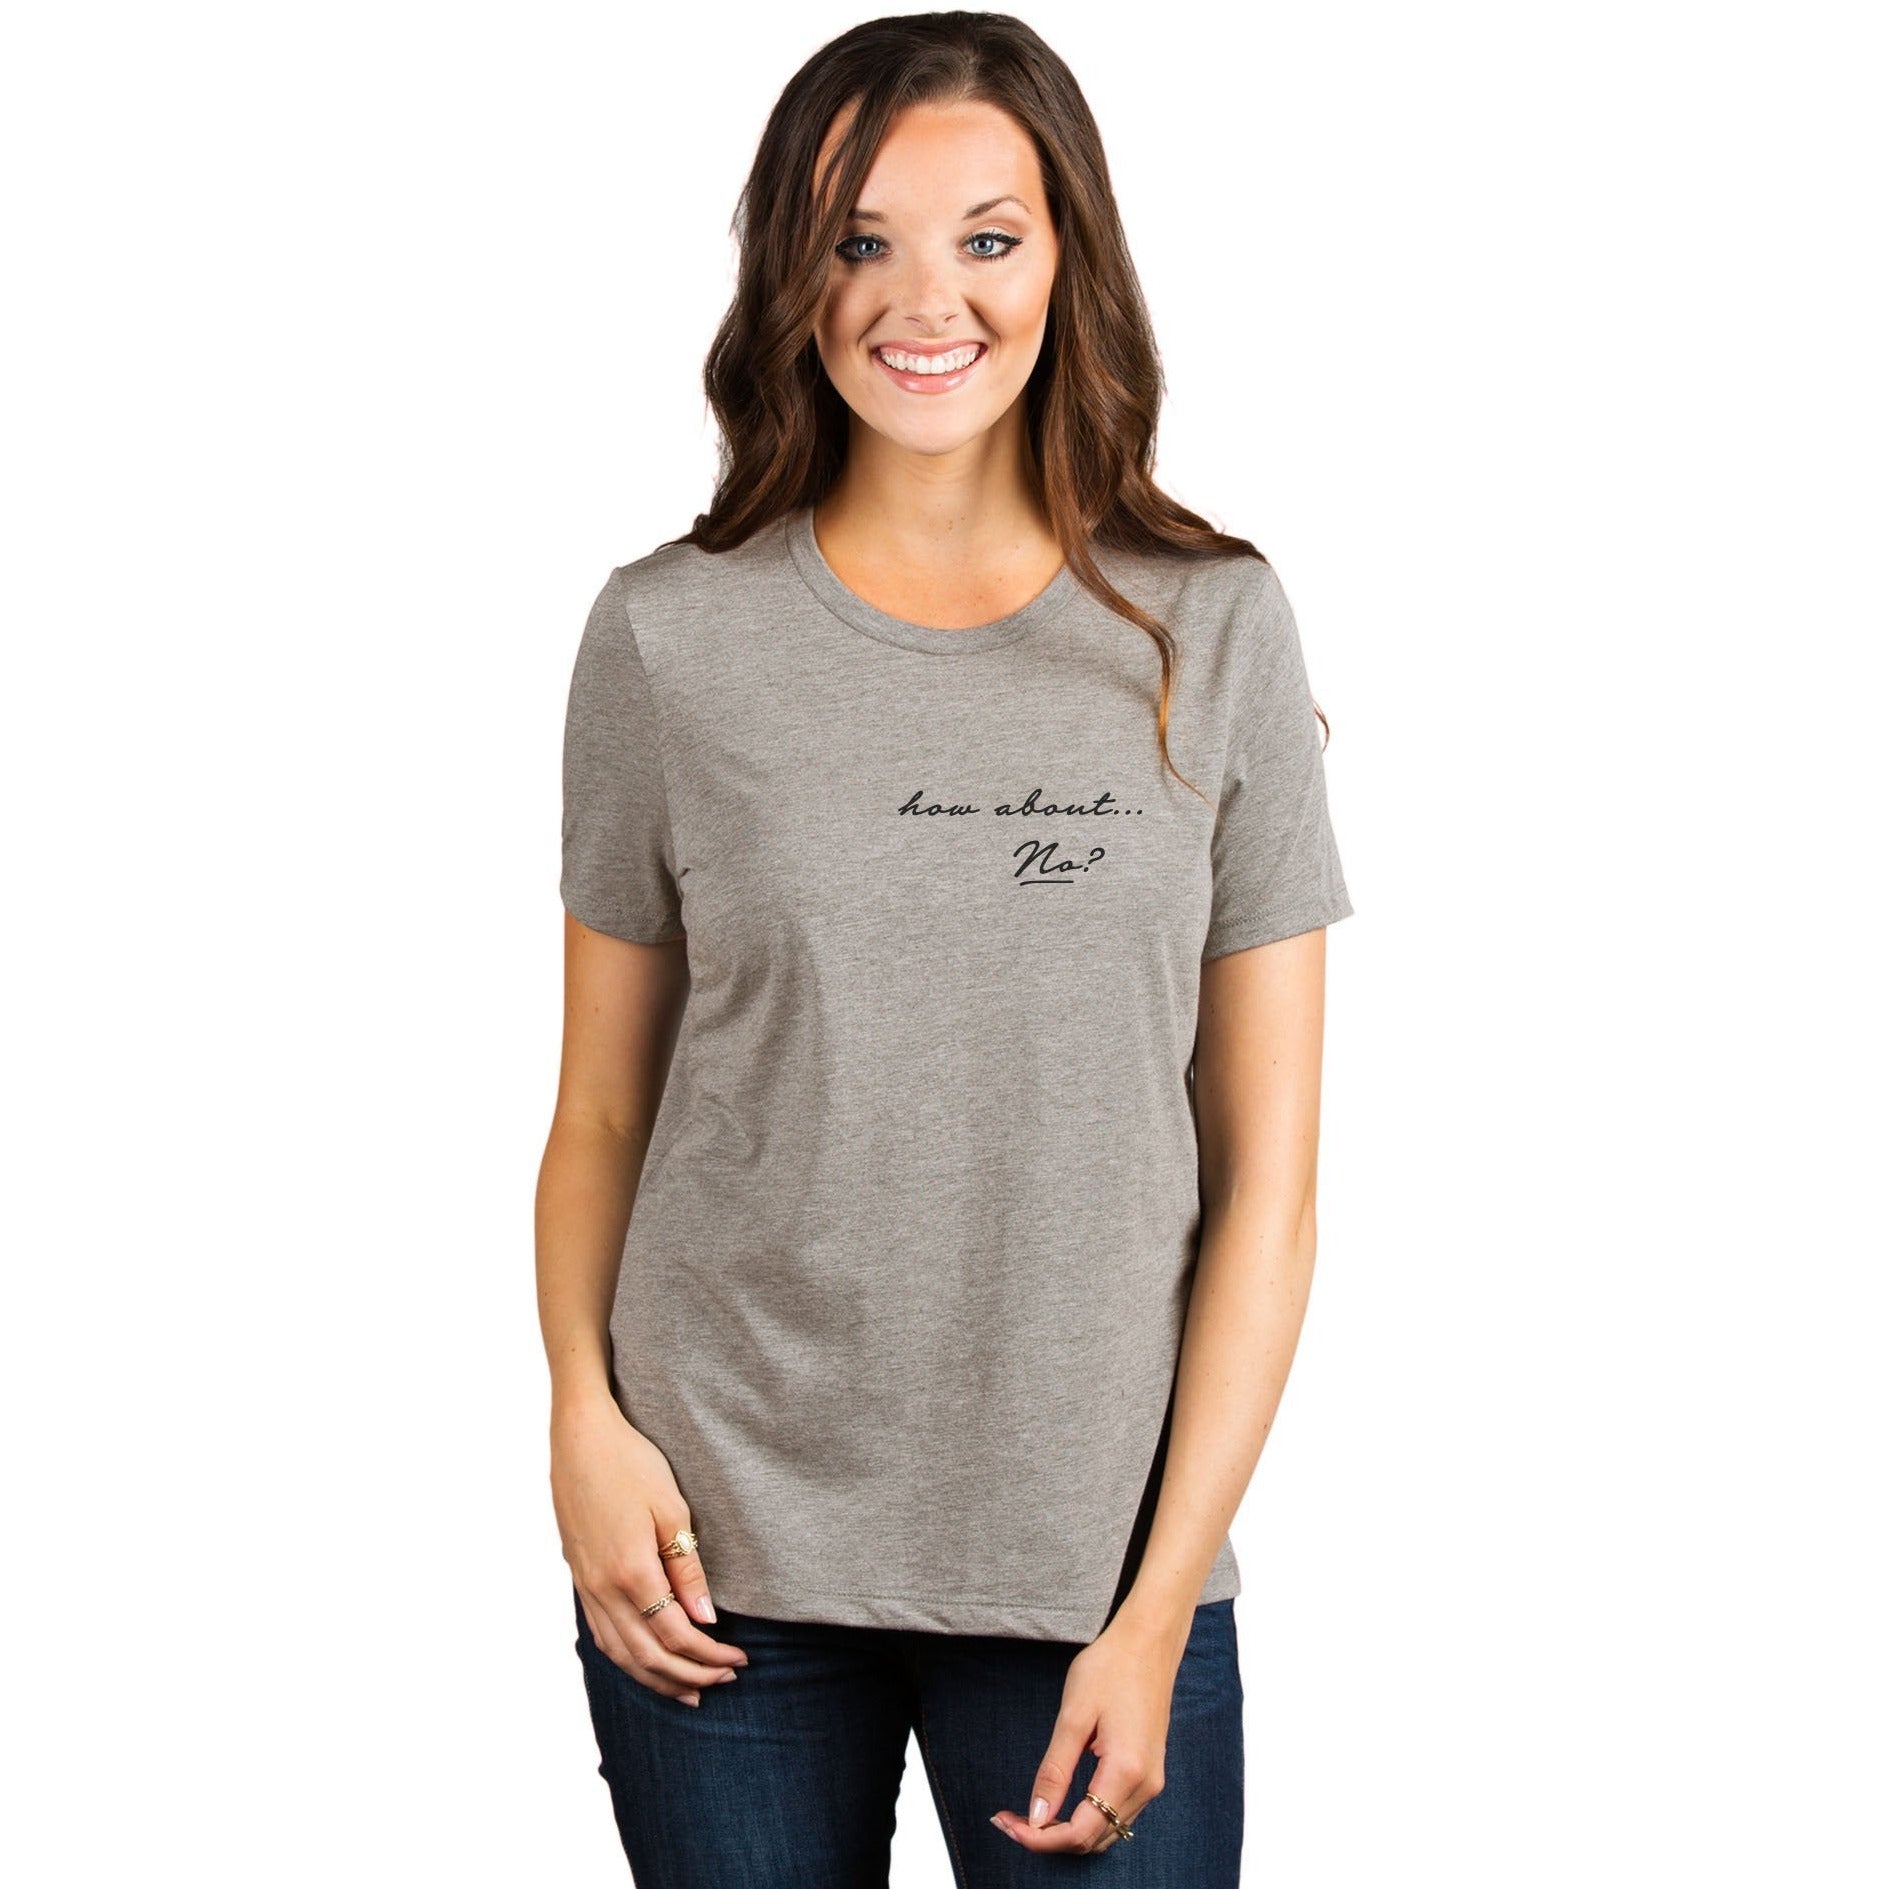 How About No Women's Relaxed Crewneck T-Shirt Top Tee Heather Tan Model